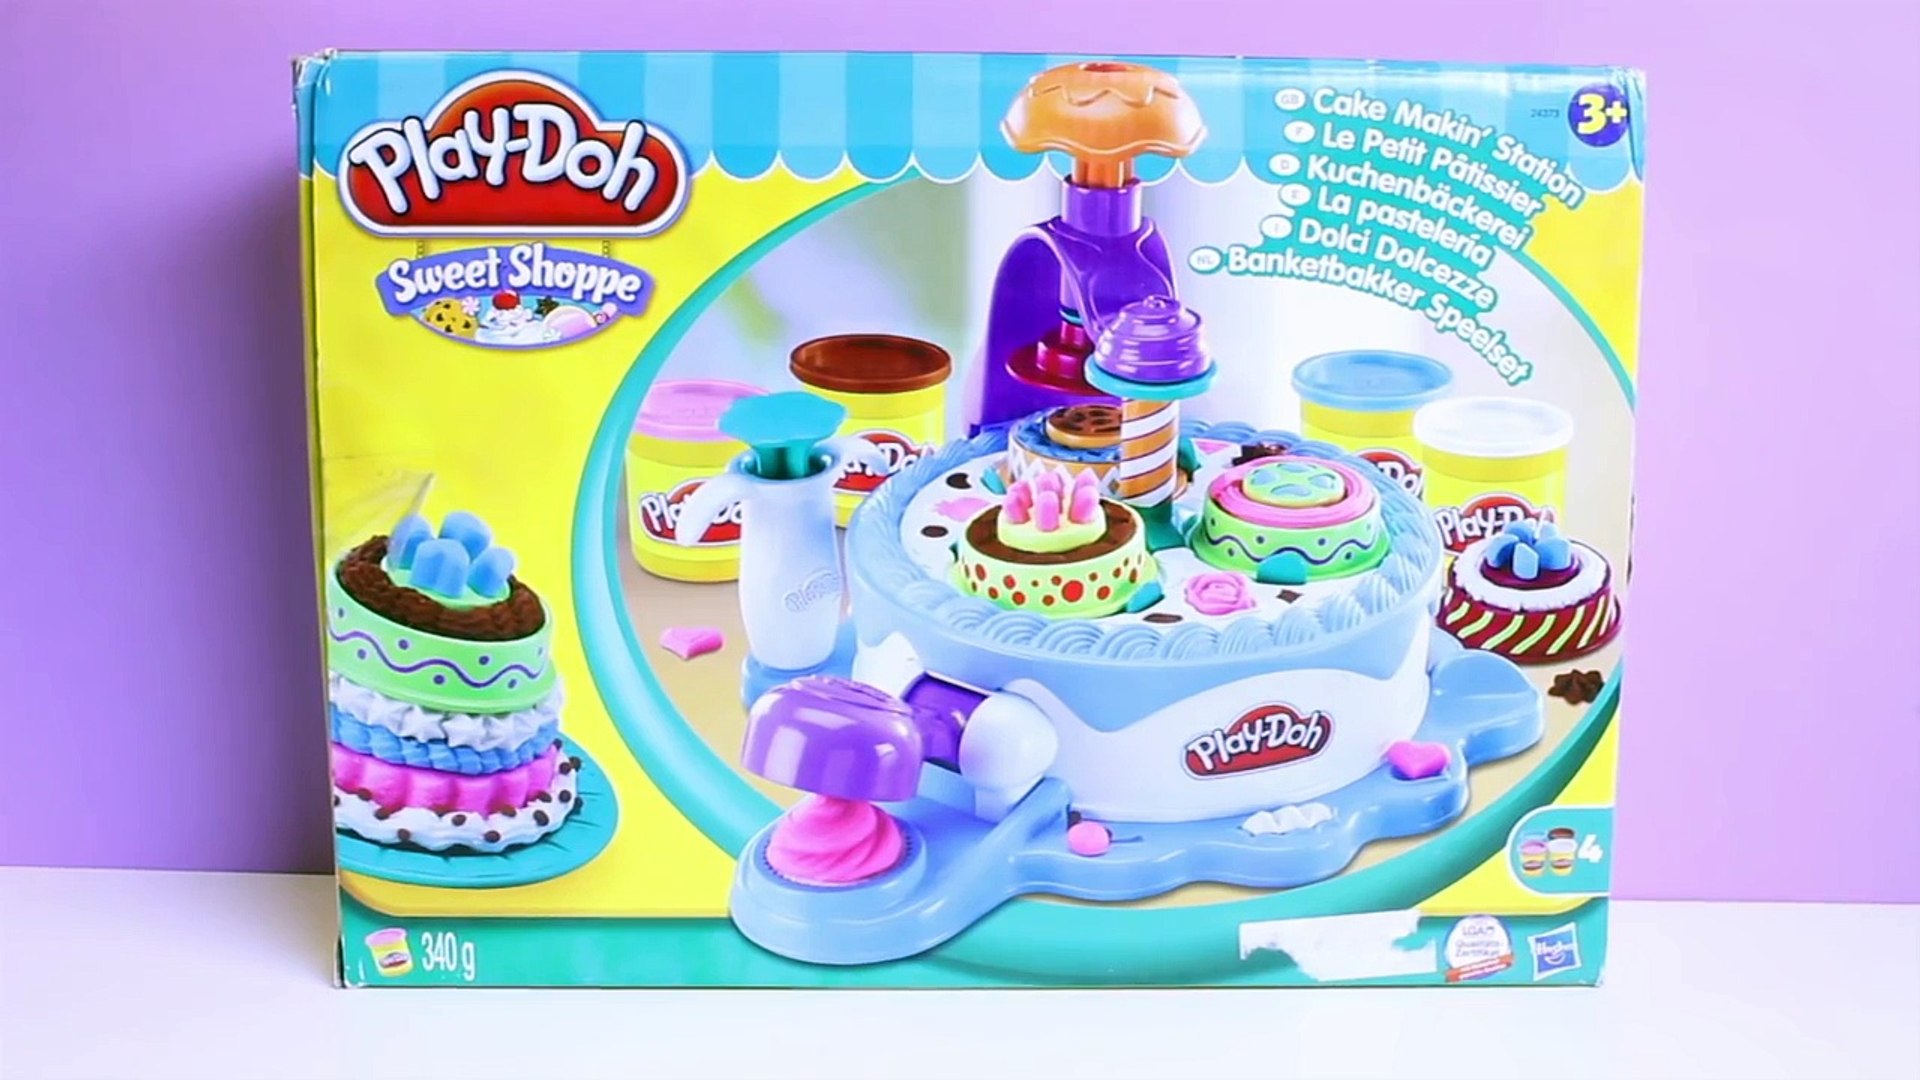 Play-Doh Sweet Shoppe Cake Makin Station Play Dough Cake Factory Play Doh  Food Toy Food - Dailymotion Video